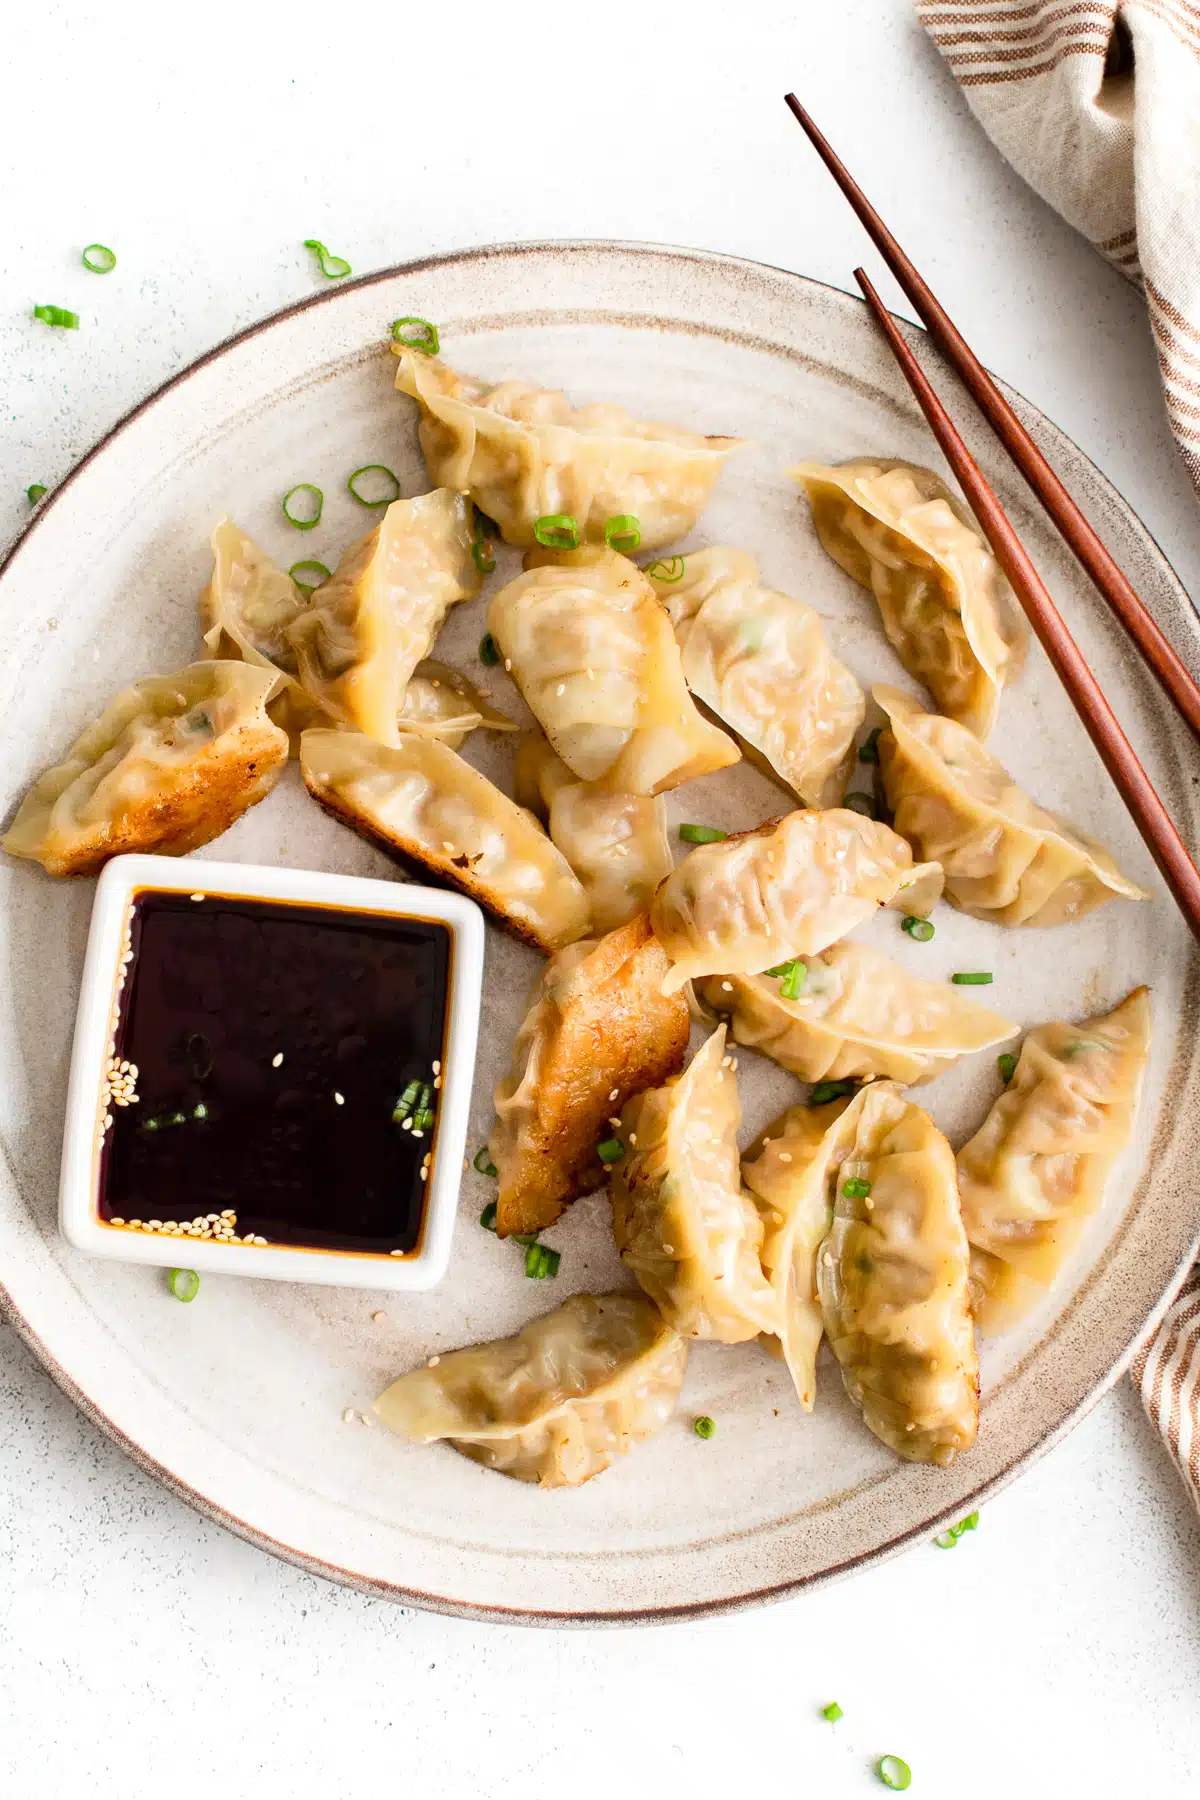 Large plate filled with golden pan-fried pork gyoza served with a side of gyoza dipping sauce.